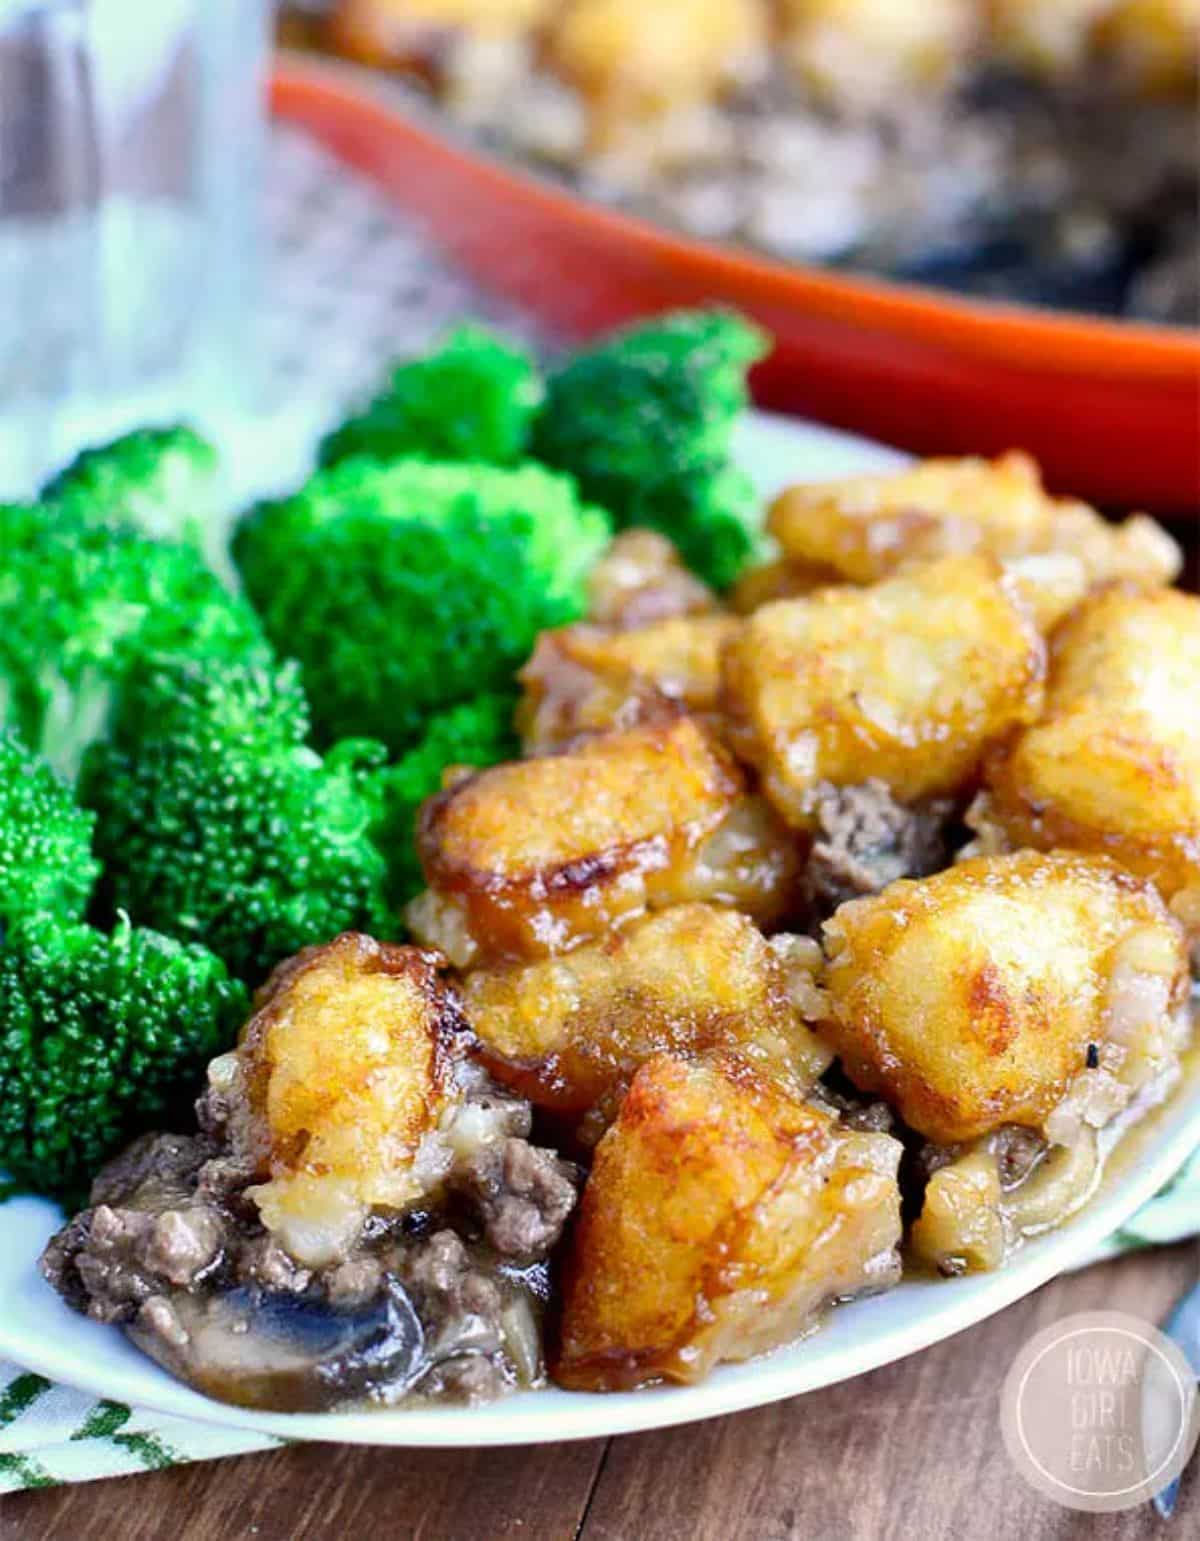 Skillet Tater Tot with broccoli on a white plate.